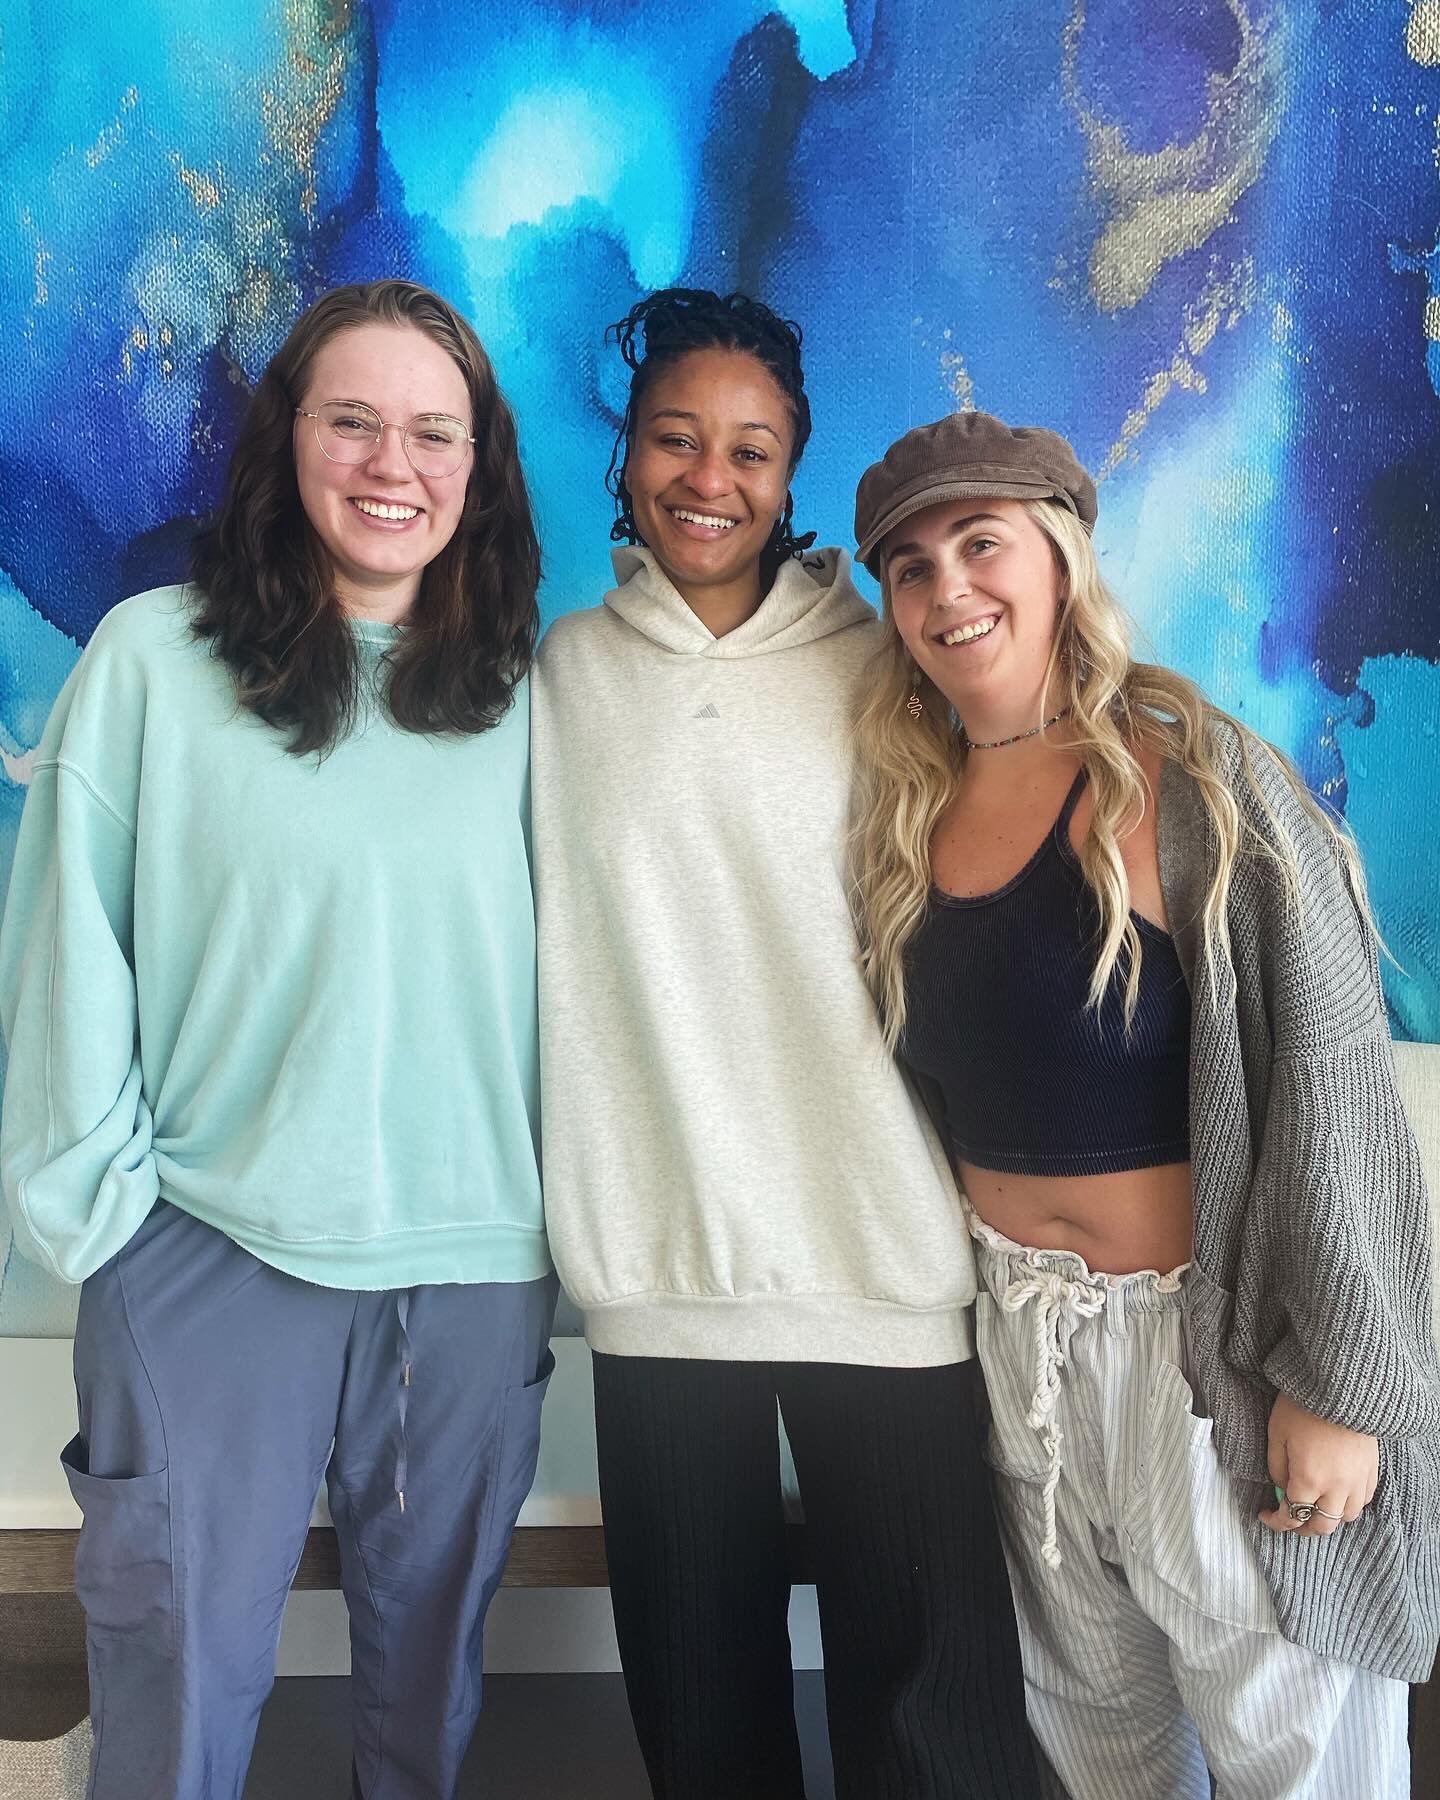 ✨ Today, we had the honor of welcoming @imdorsey from @utahroyalsfc to our studio! 🙌⚽️ She chose our center for her injury recovery, using our state-of-the-art facilities to promote healing and relaxation. The sauna helps to ease muscle tension and 